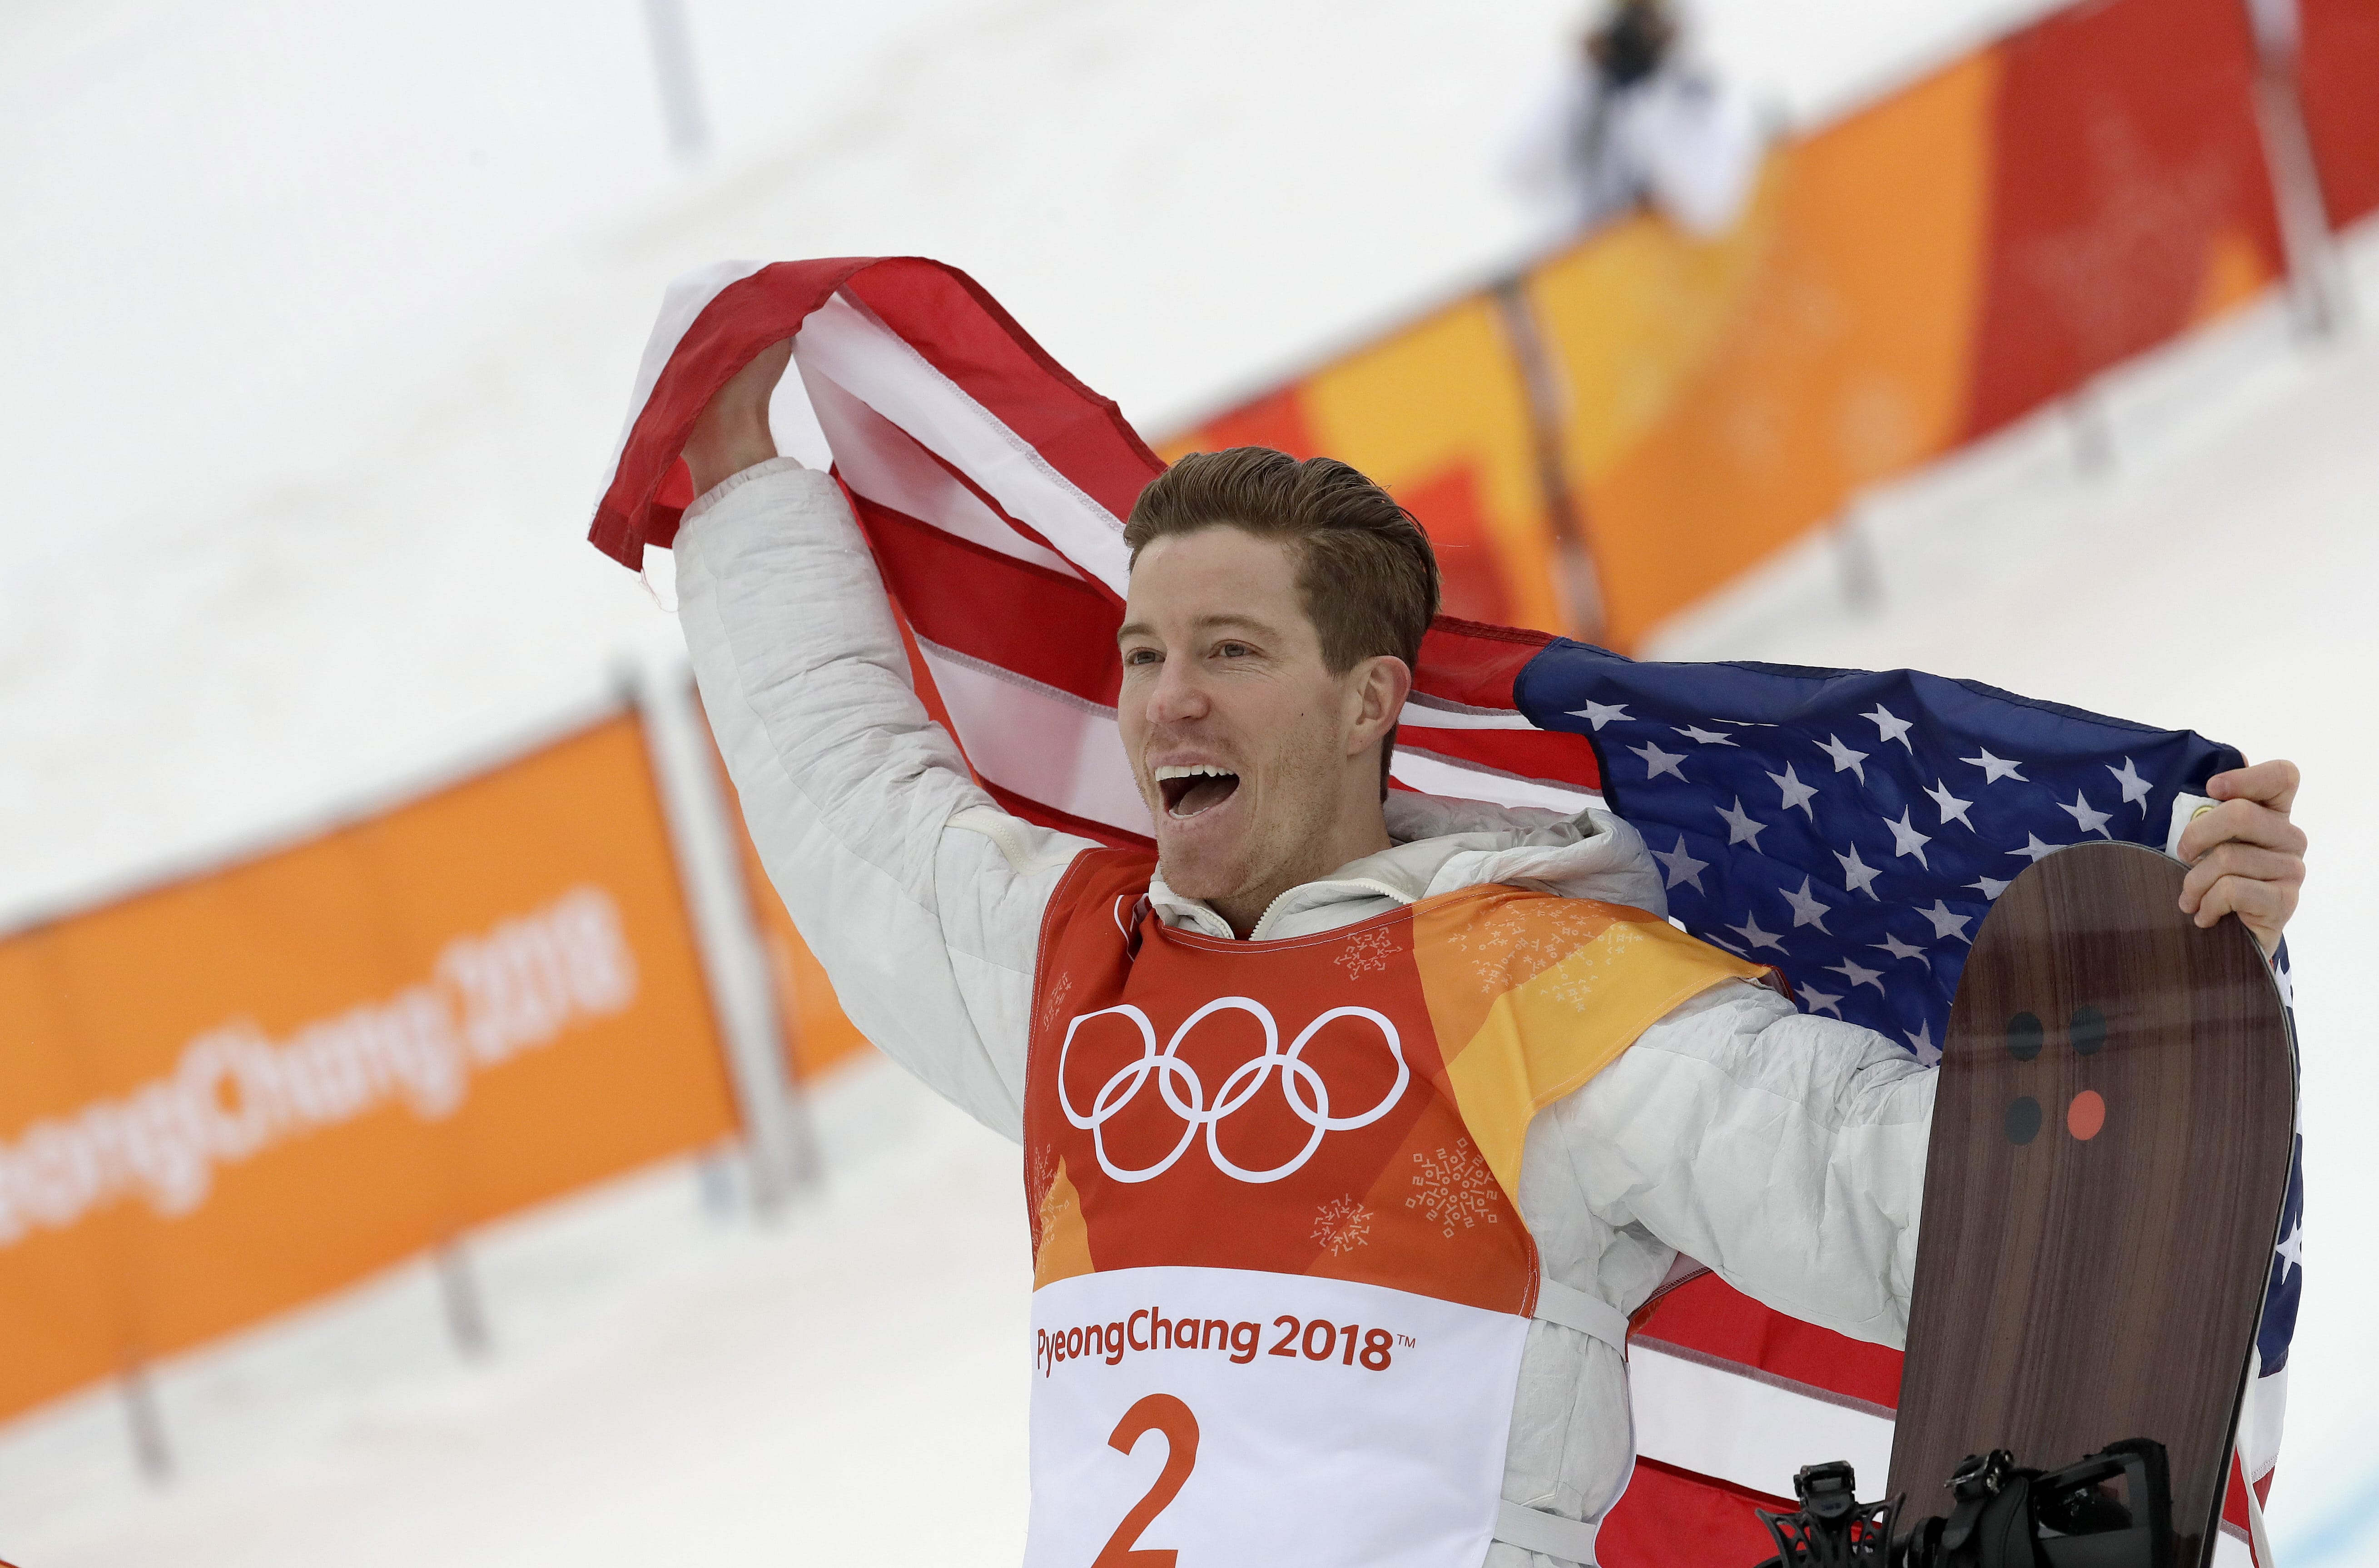 Shaun White Olympics Medals: All His Winter Games Performances